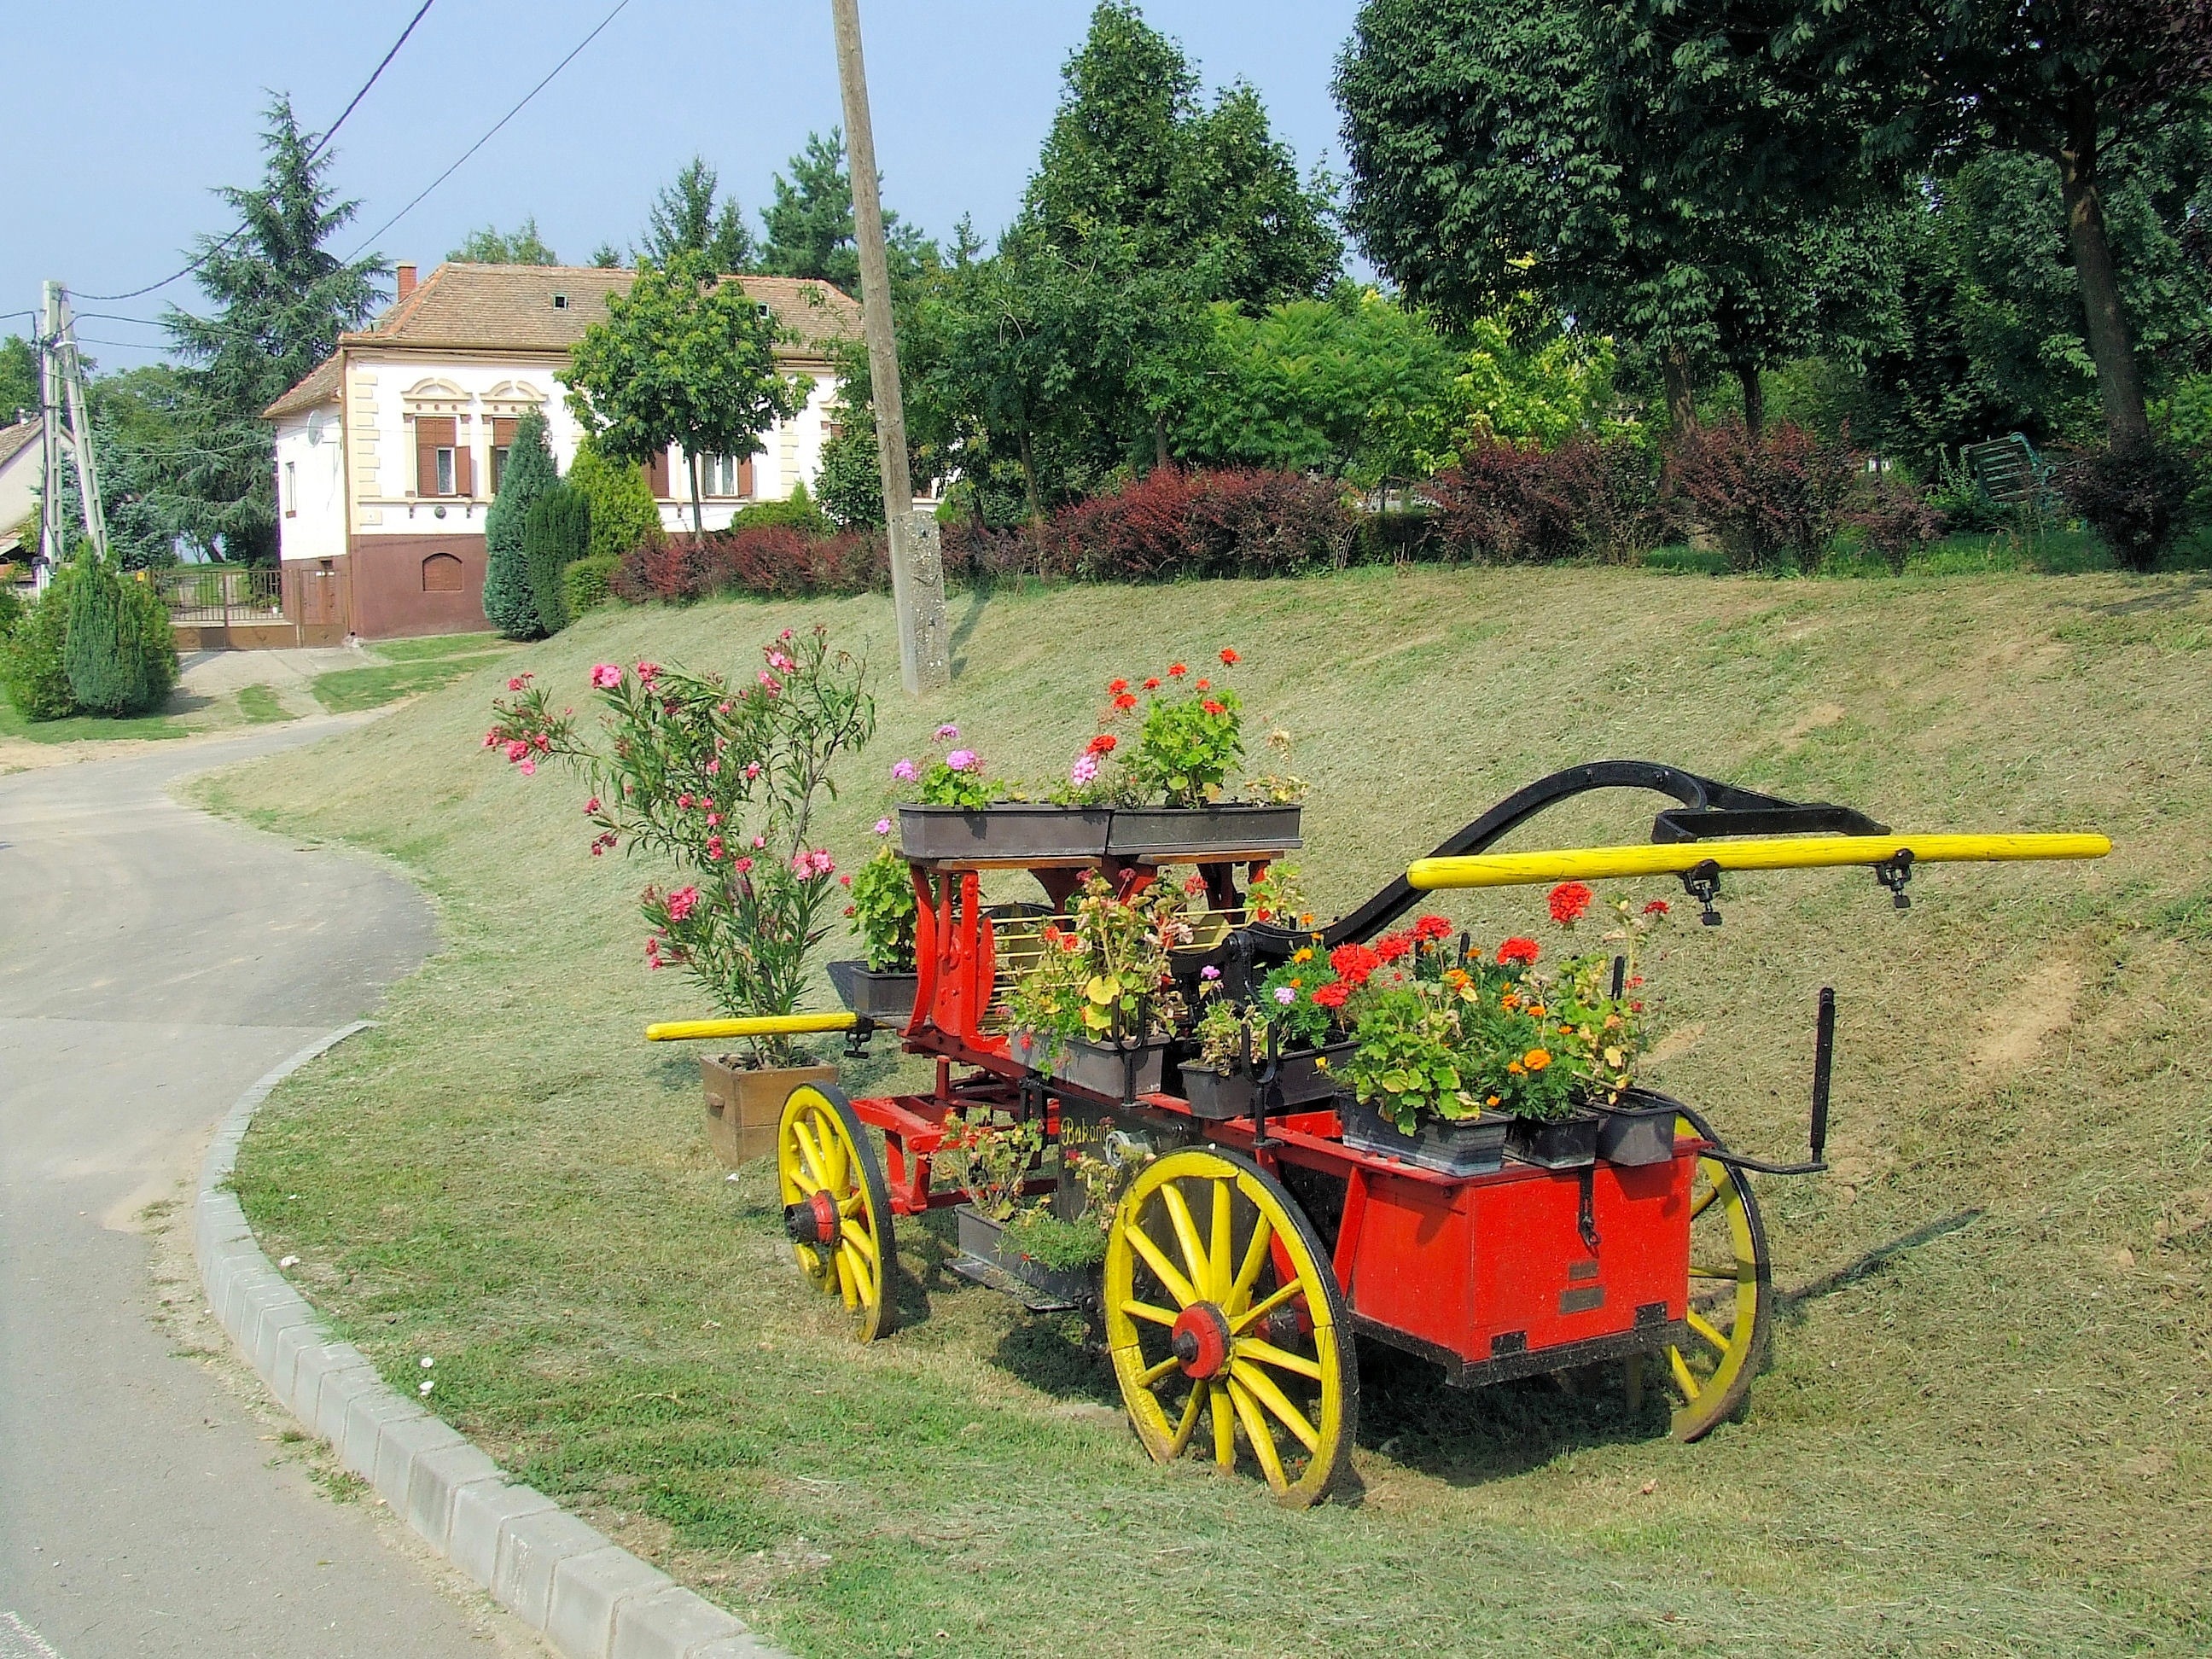 red petaled flower and red carriage